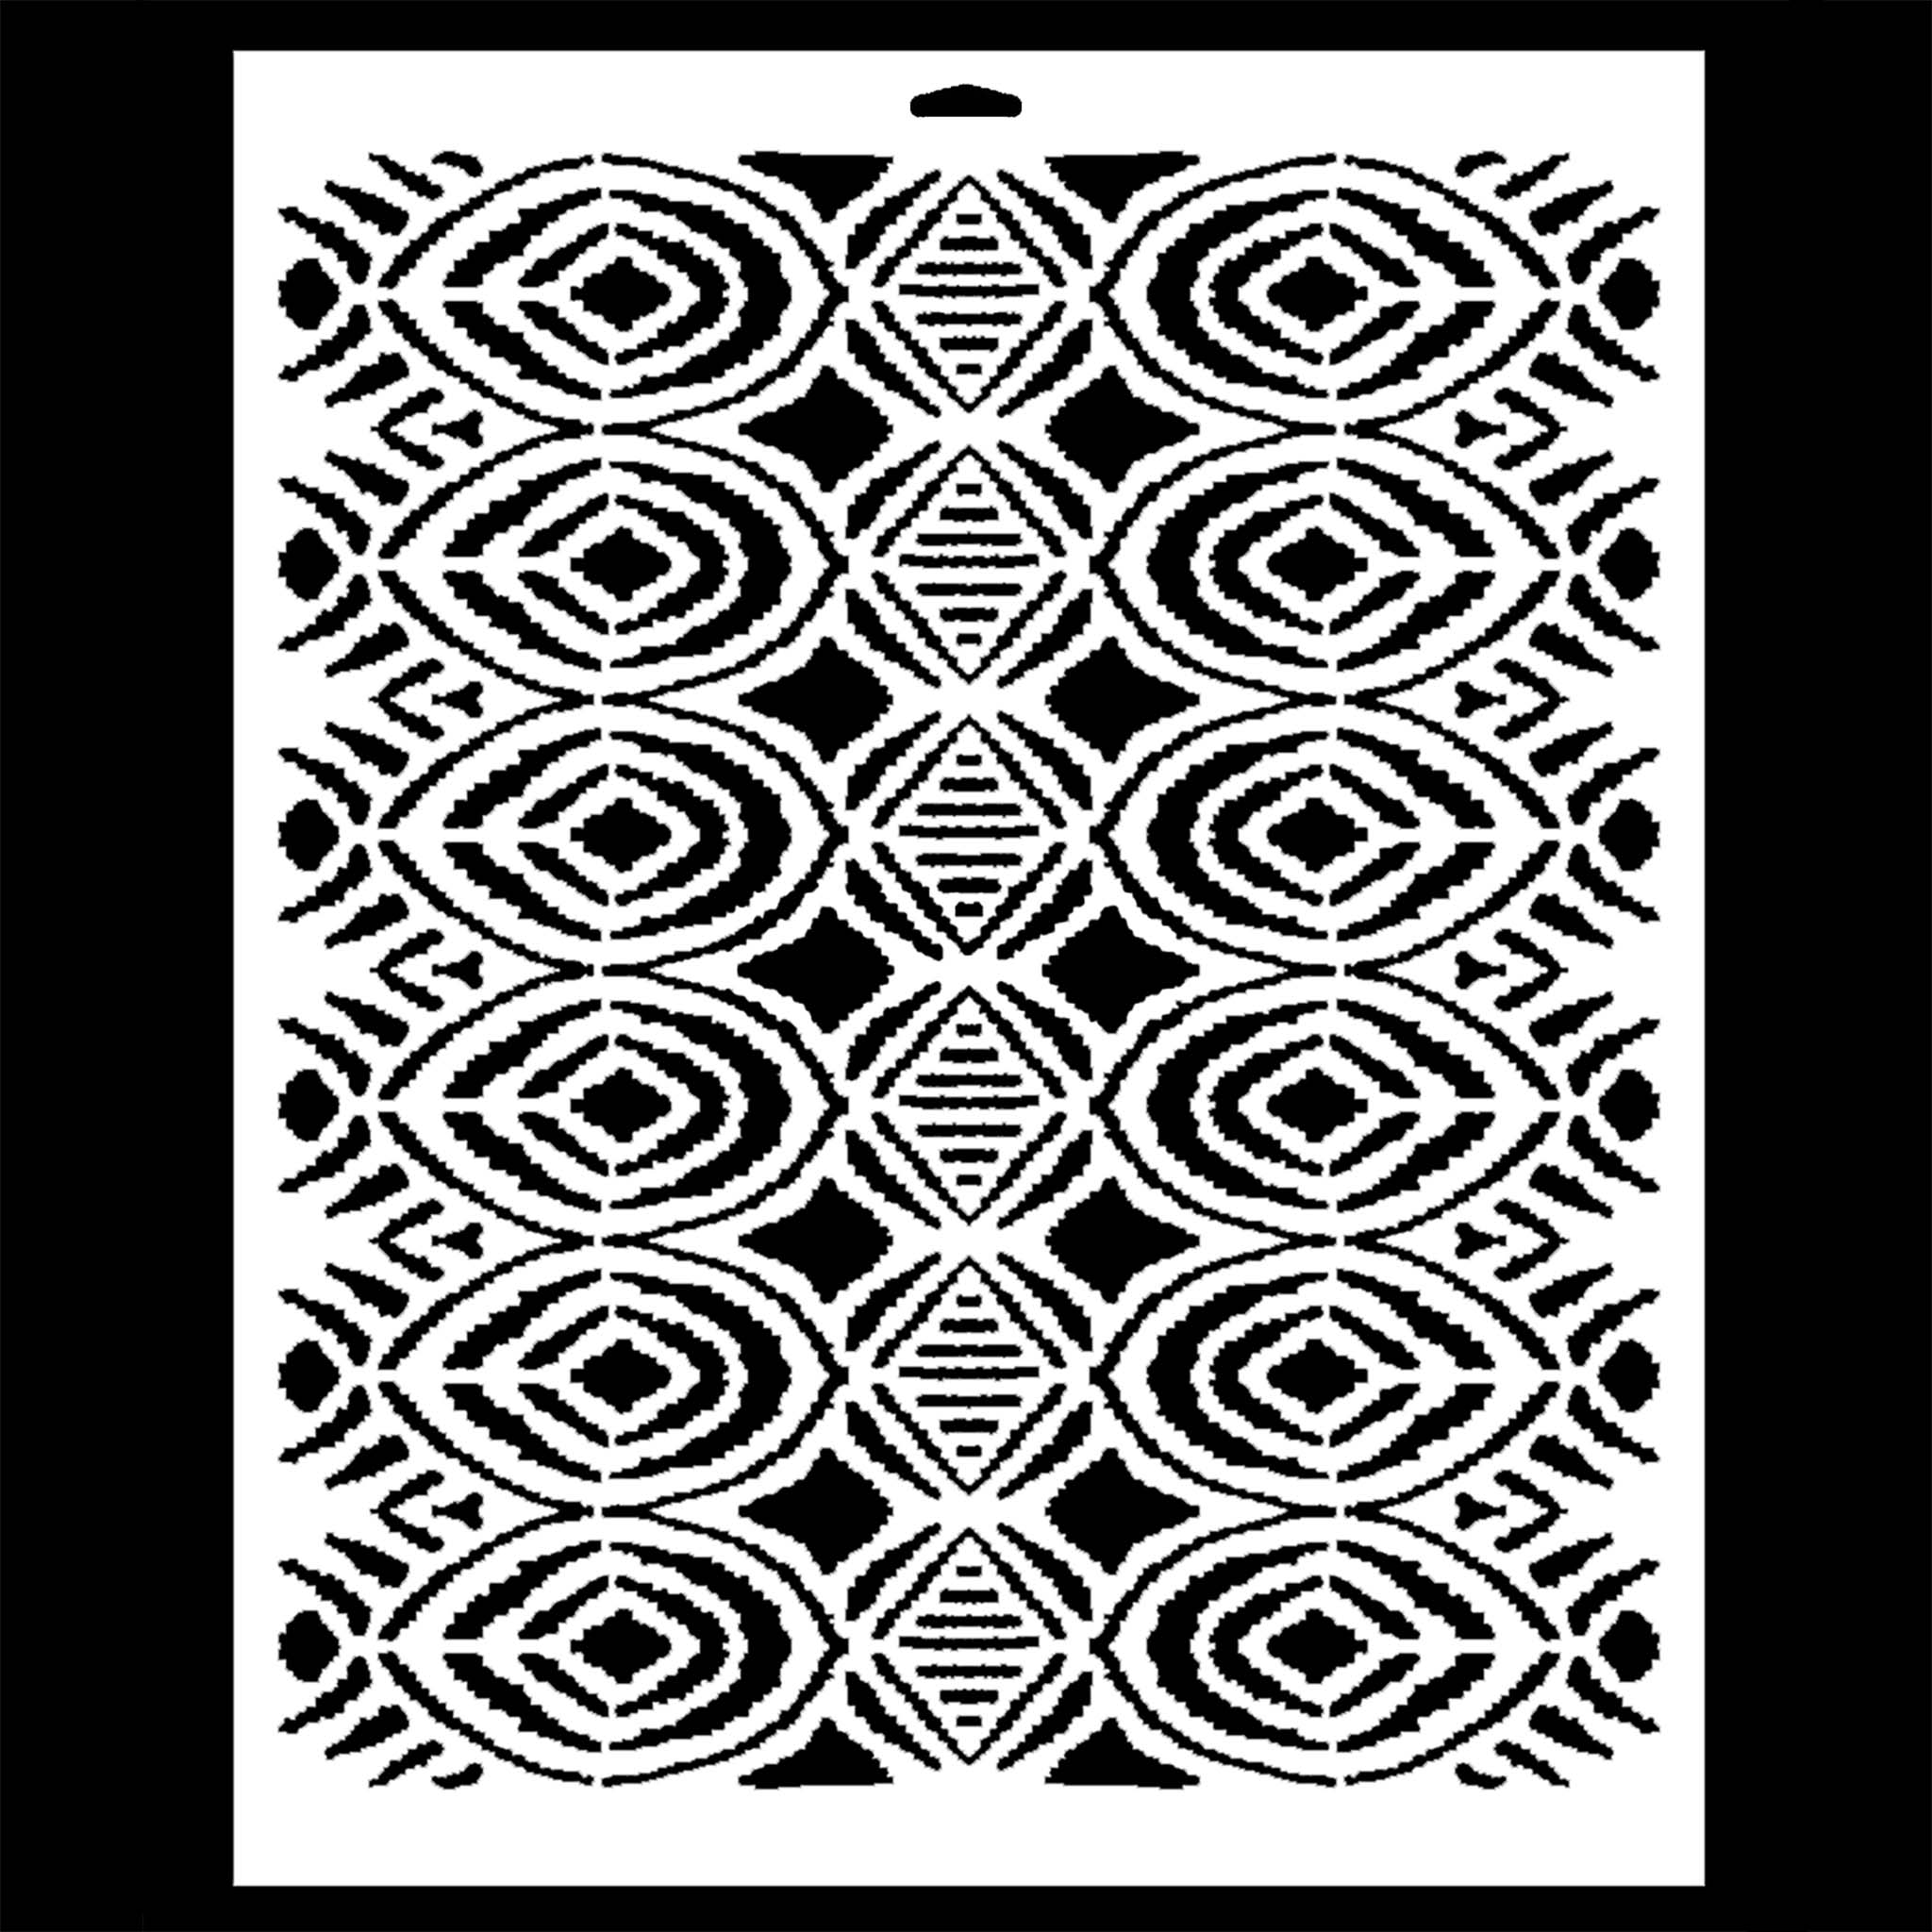 Stencil design featuring a bohemian or southwest rug pattern.